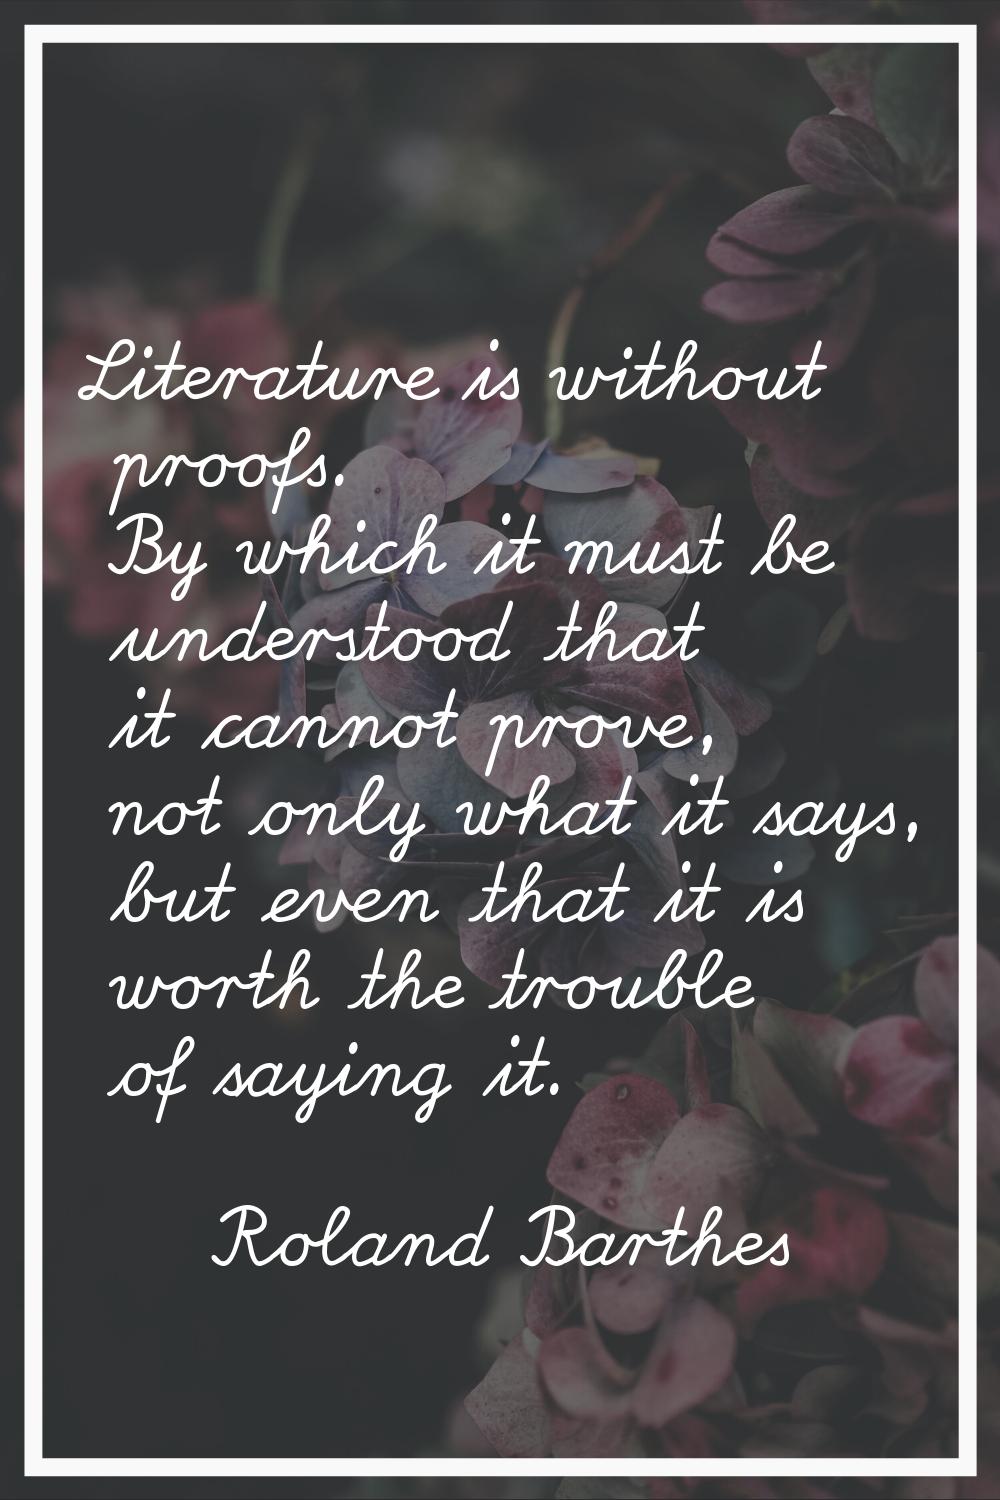 Literature is without proofs. By which it must be understood that it cannot prove, not only what it